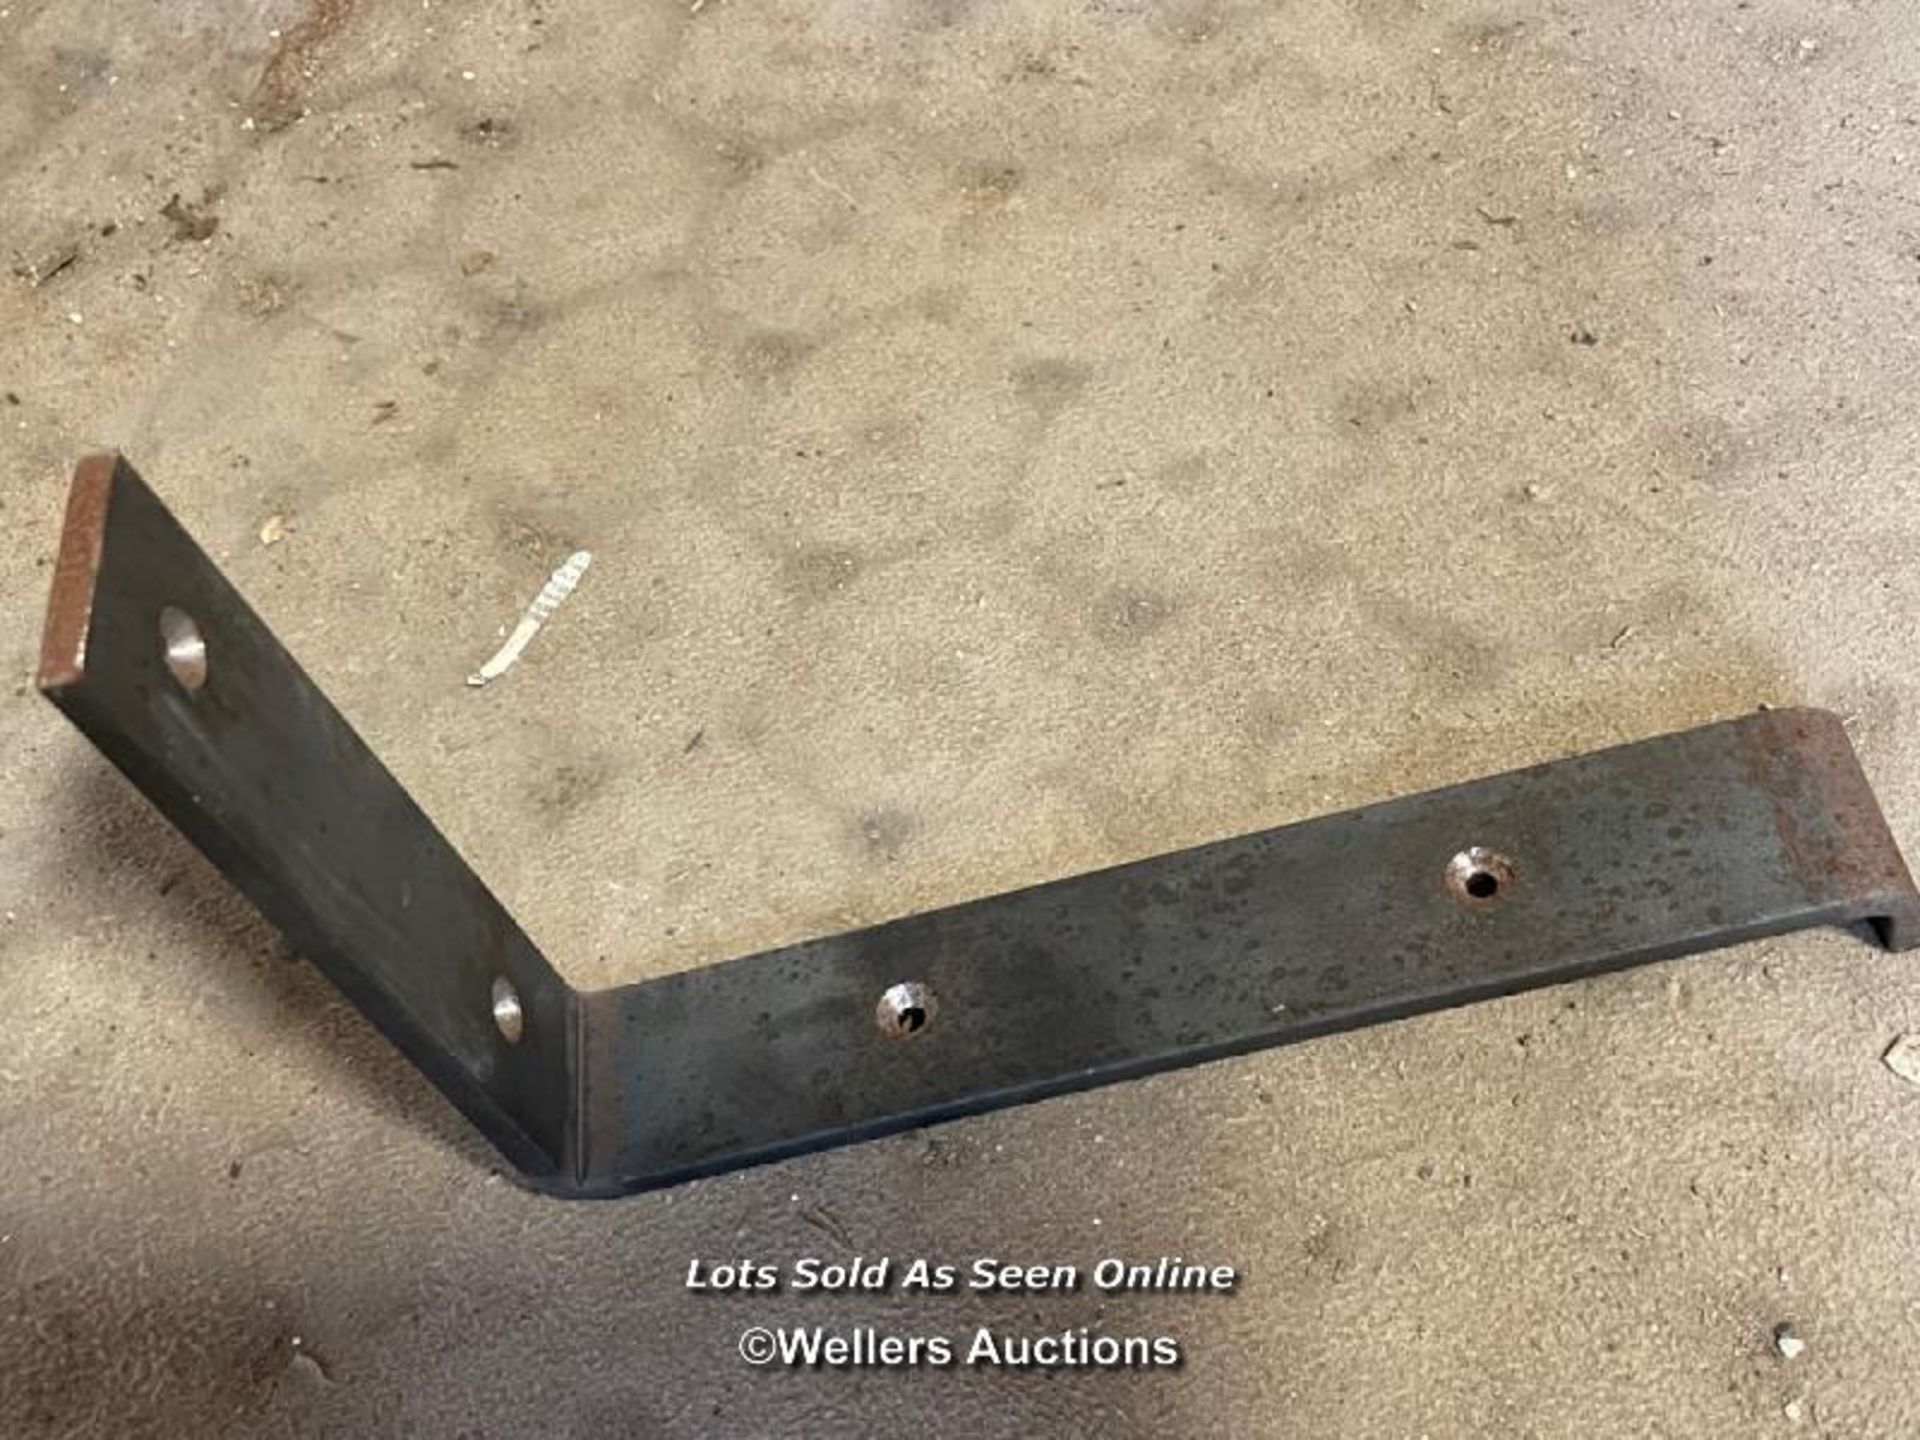 51 metal shelf brackets. 23cm x 15.5cm x 4cm for scaffold boards or other shelving - Image 3 of 5